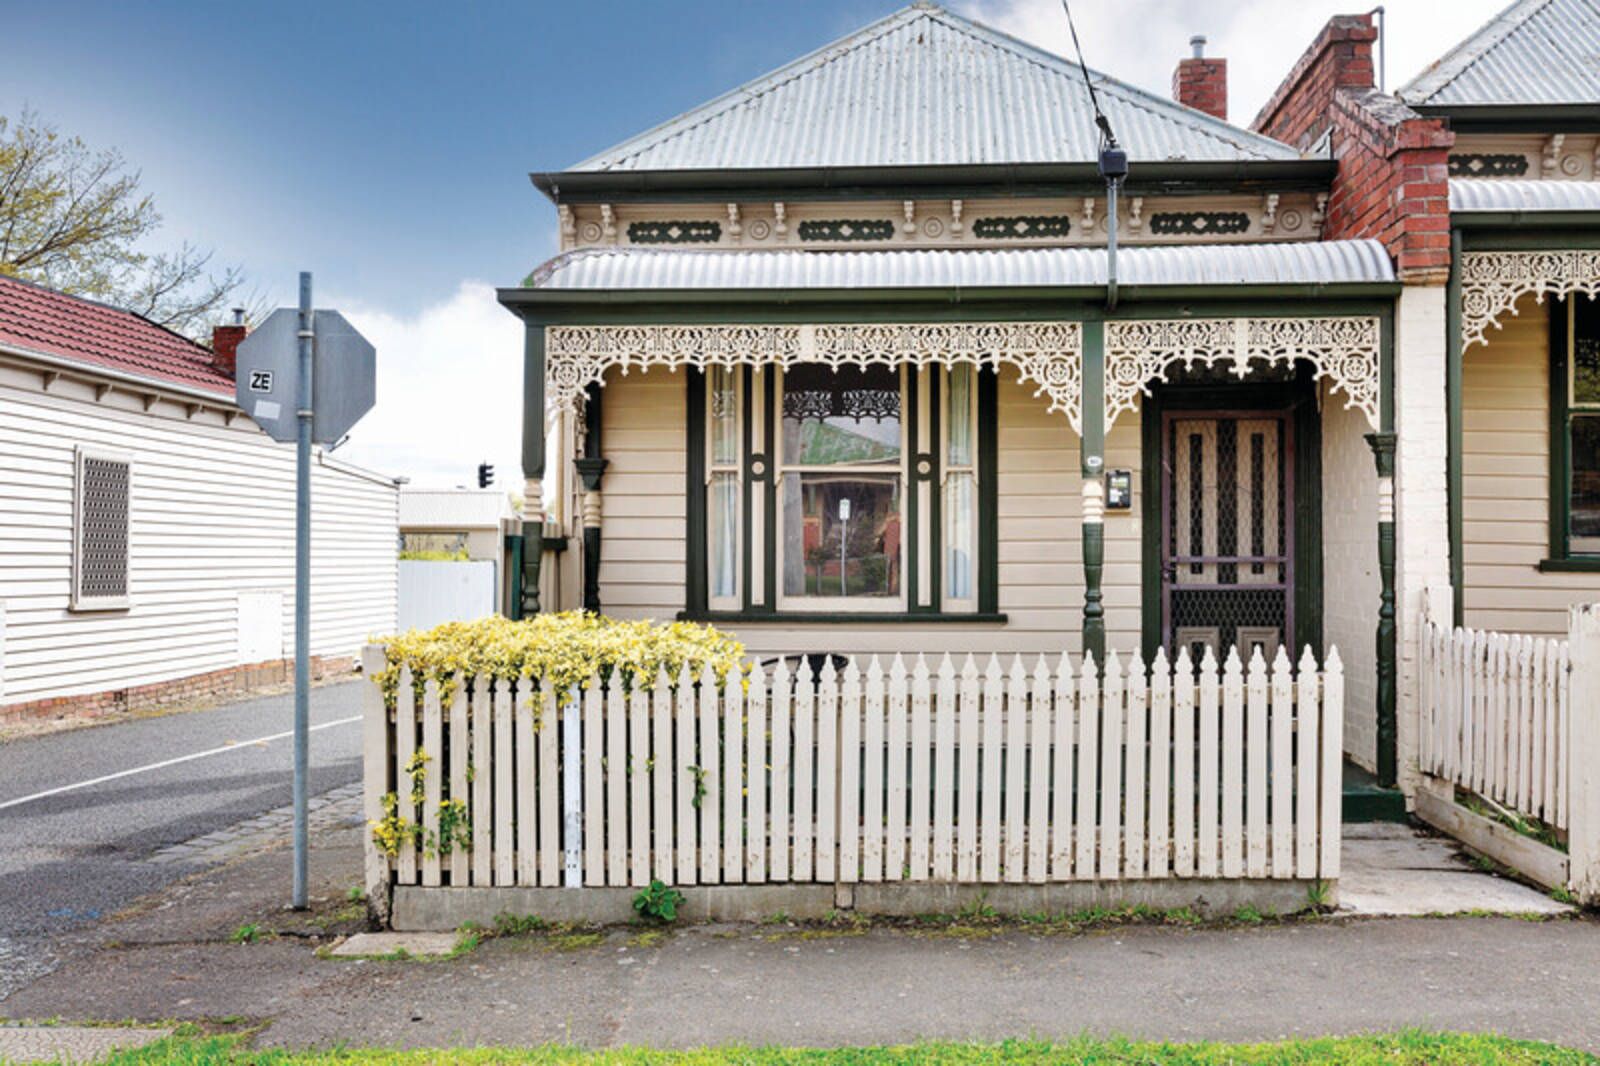 401 - 403 Doveton Street, Soldiers Hill VIC 3350, Image 1